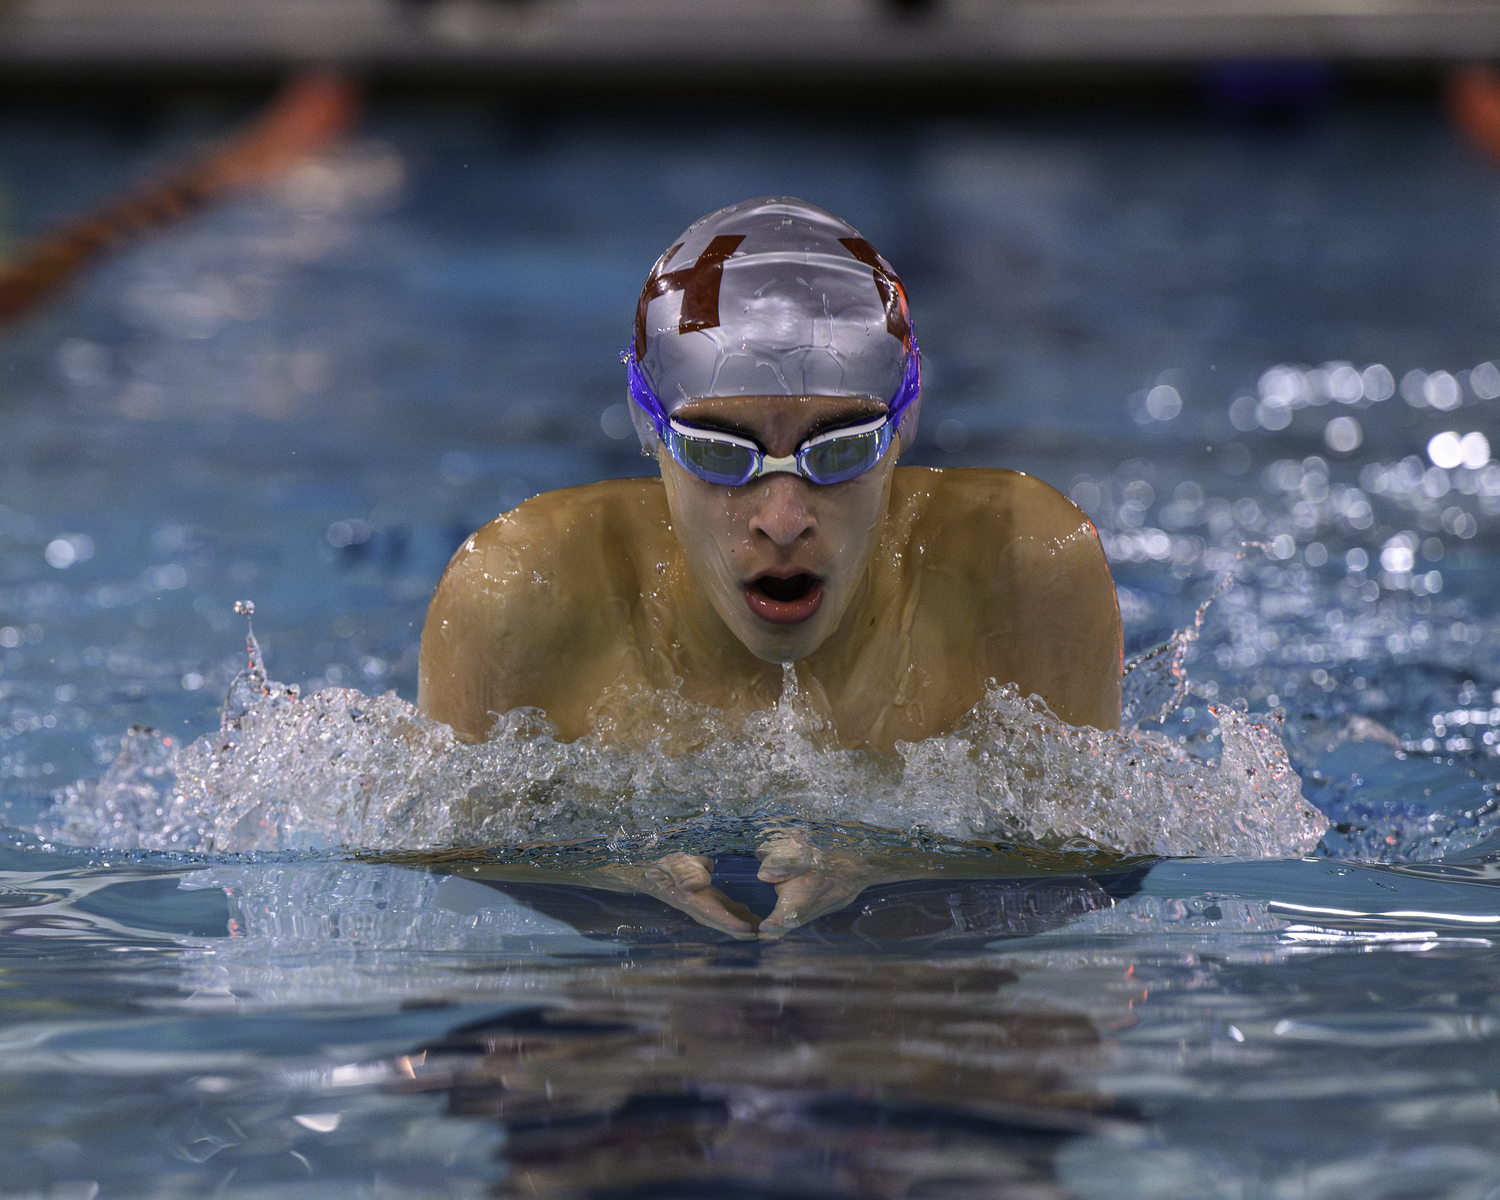 Pierson freshman Nick Chavez trimmed 1.9 seconds off his previous personal best in the 100-yard breaststroke to finish second in League II and earn a chance to compete in the Suffolk County race. MARIANNE BARNETT